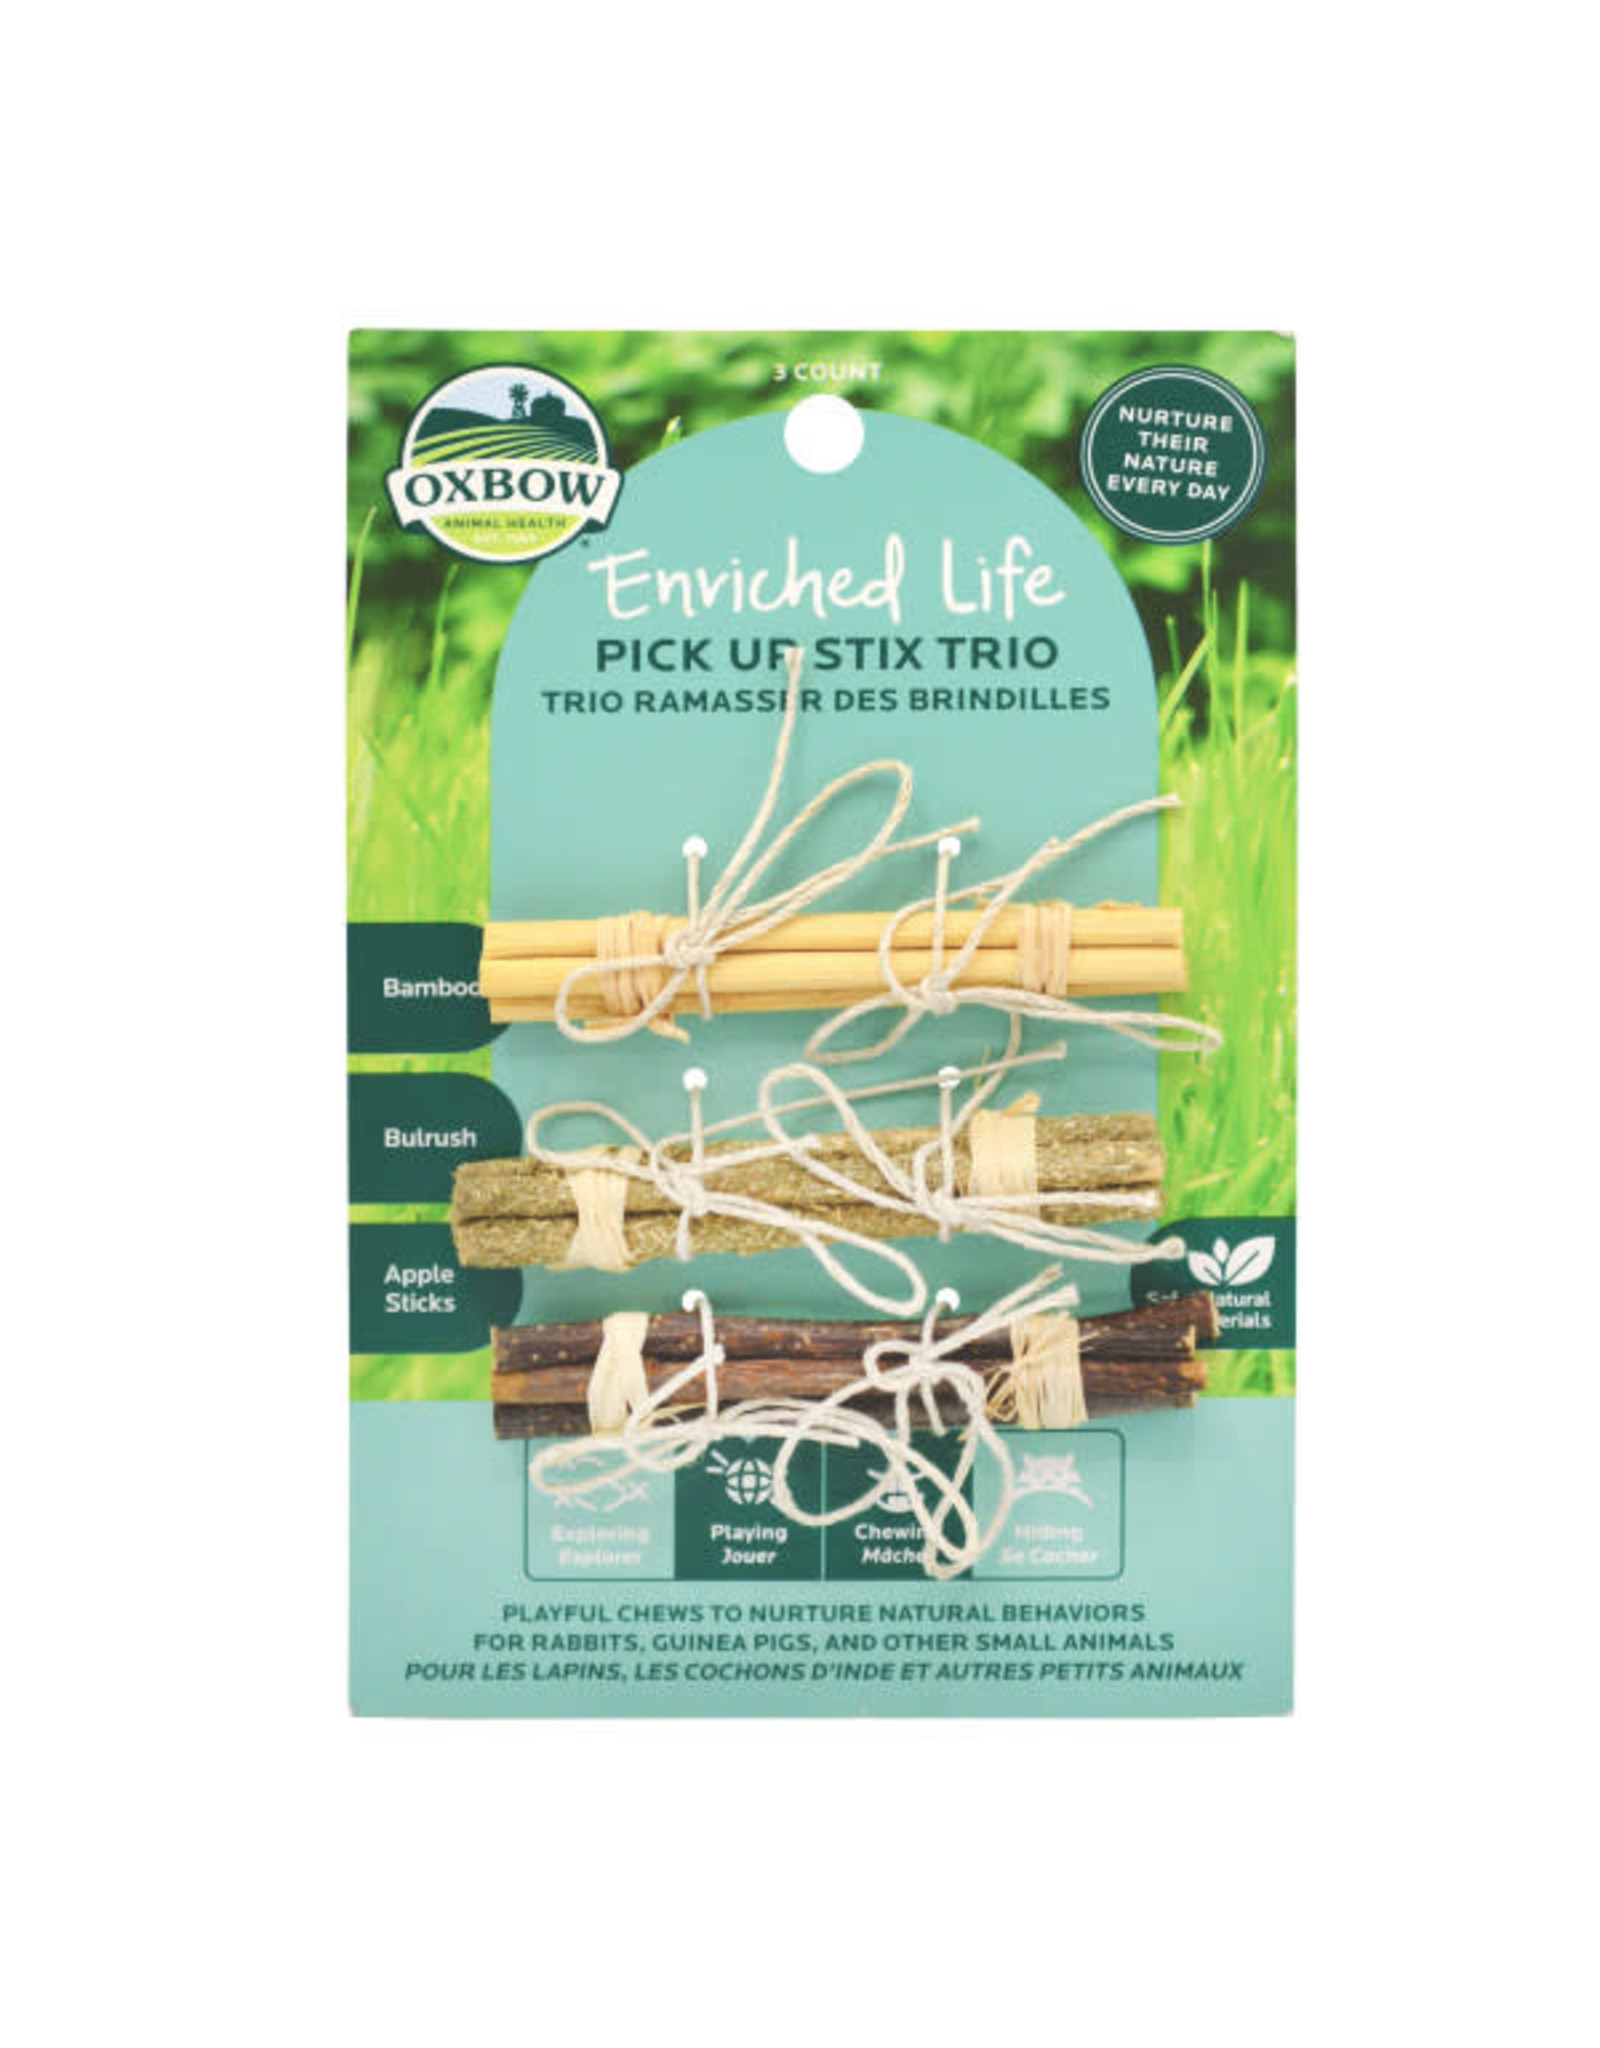 Oxbow Oxbow Enriched Life Pick Up Stix Trio